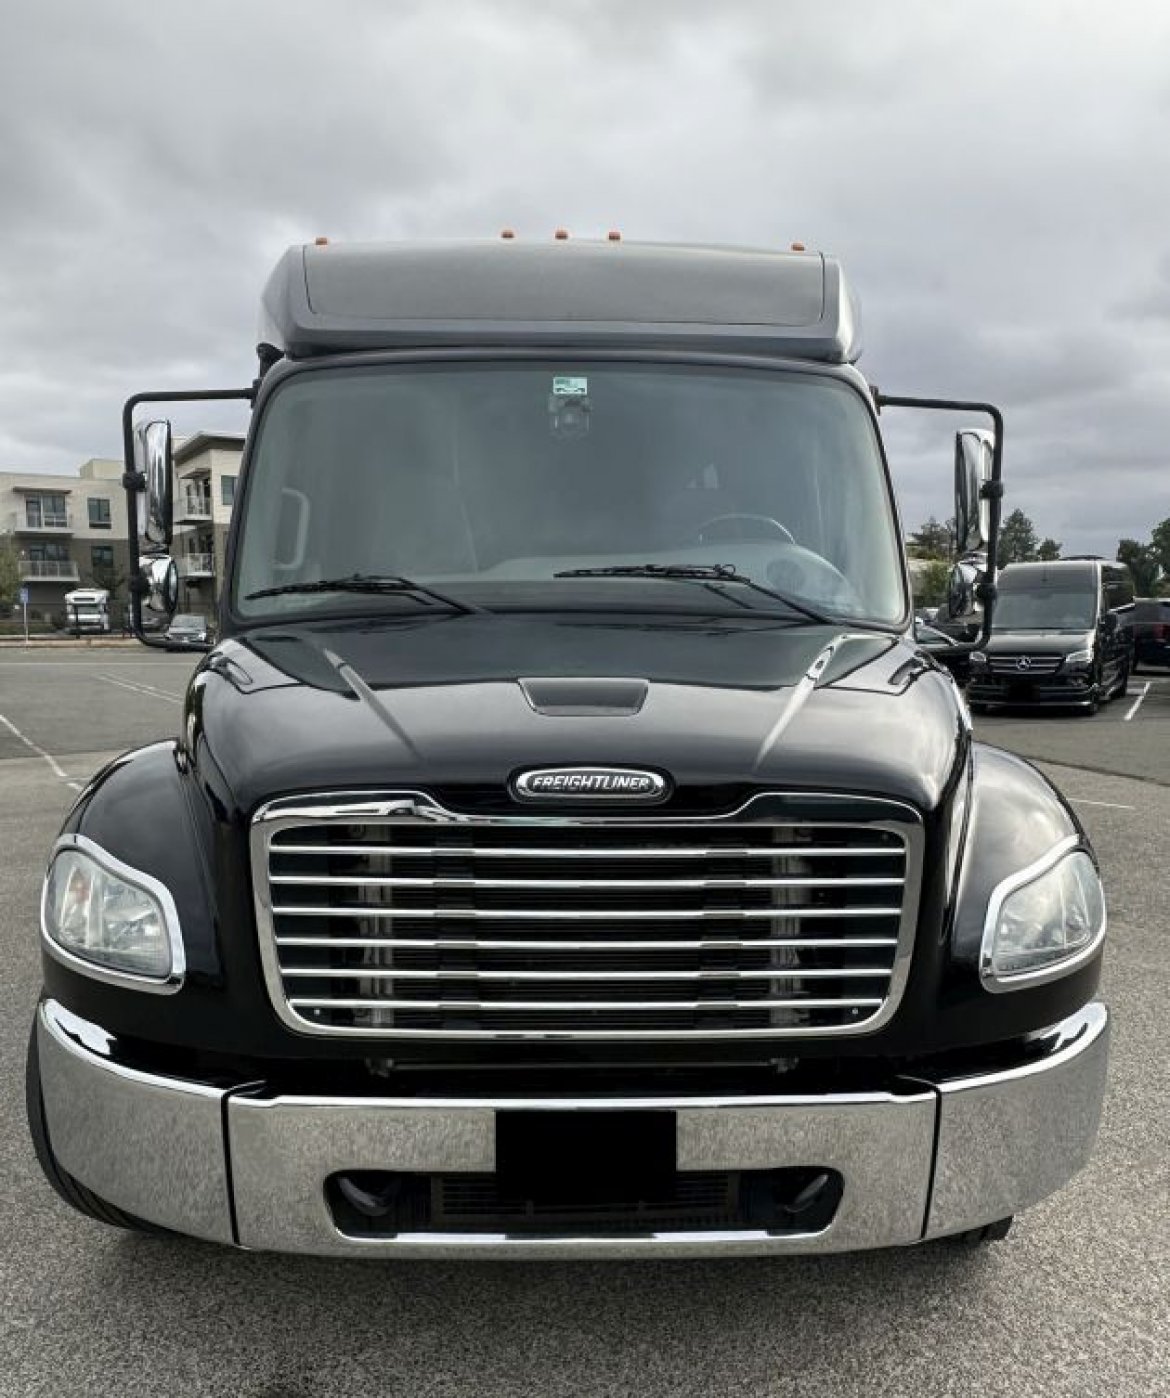 Executive Shuttle for sale: 2016 Freightliner M2 35-39 Passenger Executive Shuttle by Grech